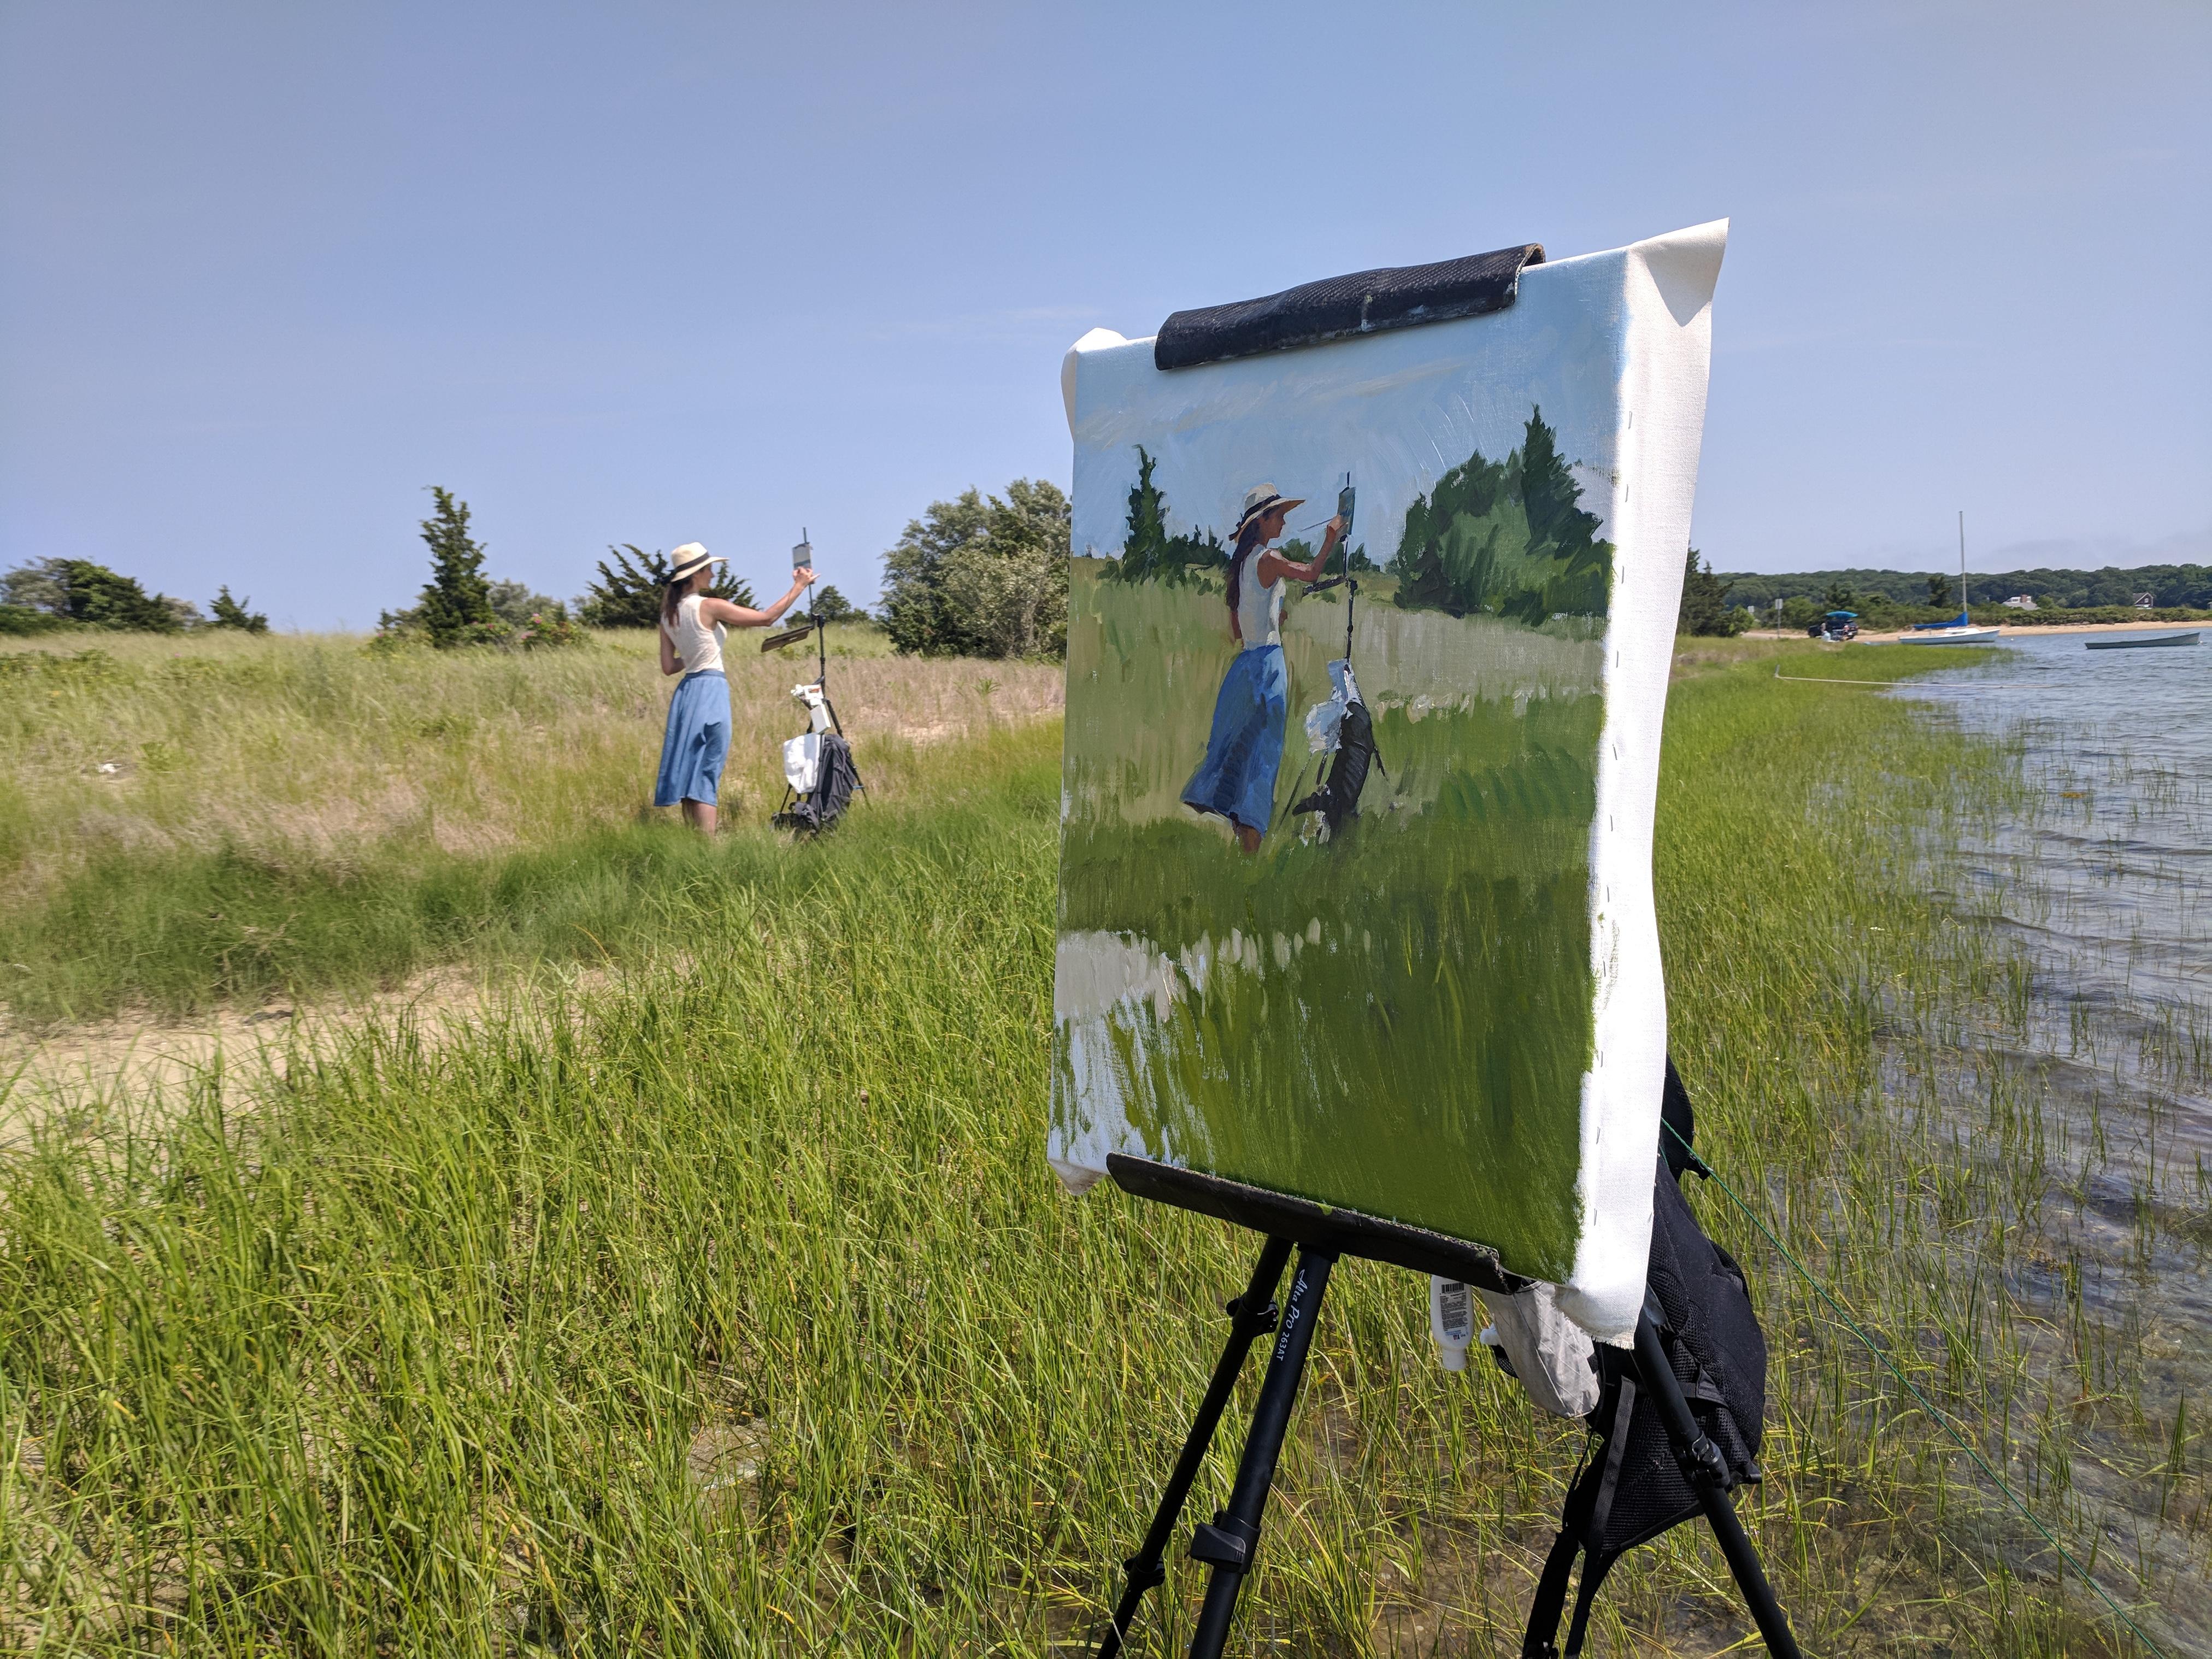 Painted en plein air, on the East End of Long Island. Dalessio captures his wife, Tina, as she paints a landscape in open air. A classical impressionist painting in the contemporary world!

Marc Dalessio was born in 1972 in Los Angeles, California.